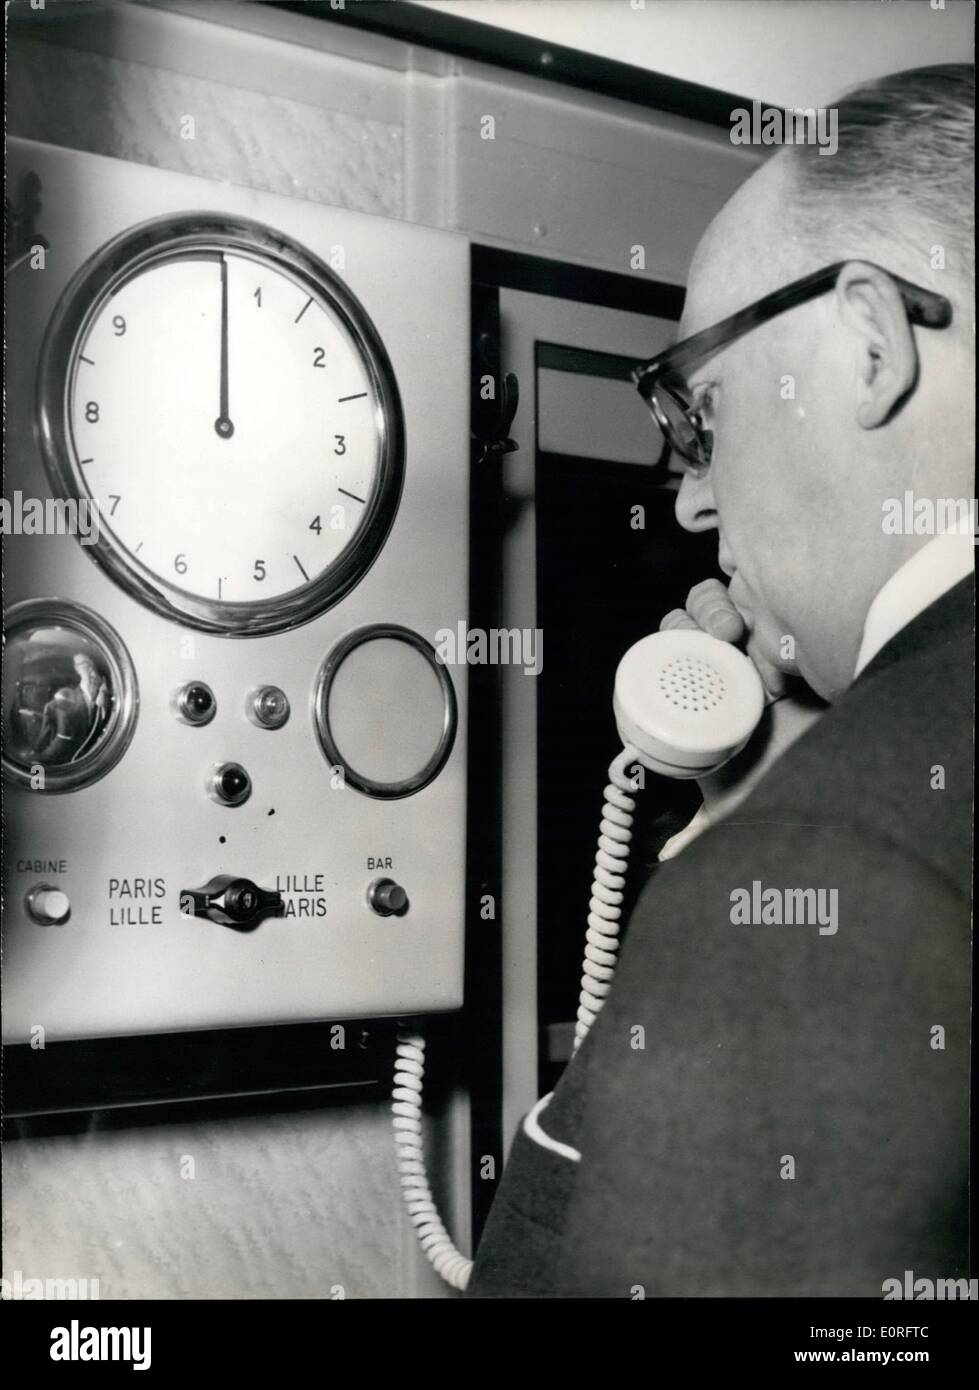 May 05, 1959 - A Telephone in the New Trains Paris Lille: The National French Railways Society Presented to day one of the New trains to be put in service on the line Paris Lille. the Waggons are made in Rustless steel. Each train has a Bar Waggon with a sound proof telephone booth. Photo Shows A Traveller talking on the telephone in the Bar Waggon. Stock Photo